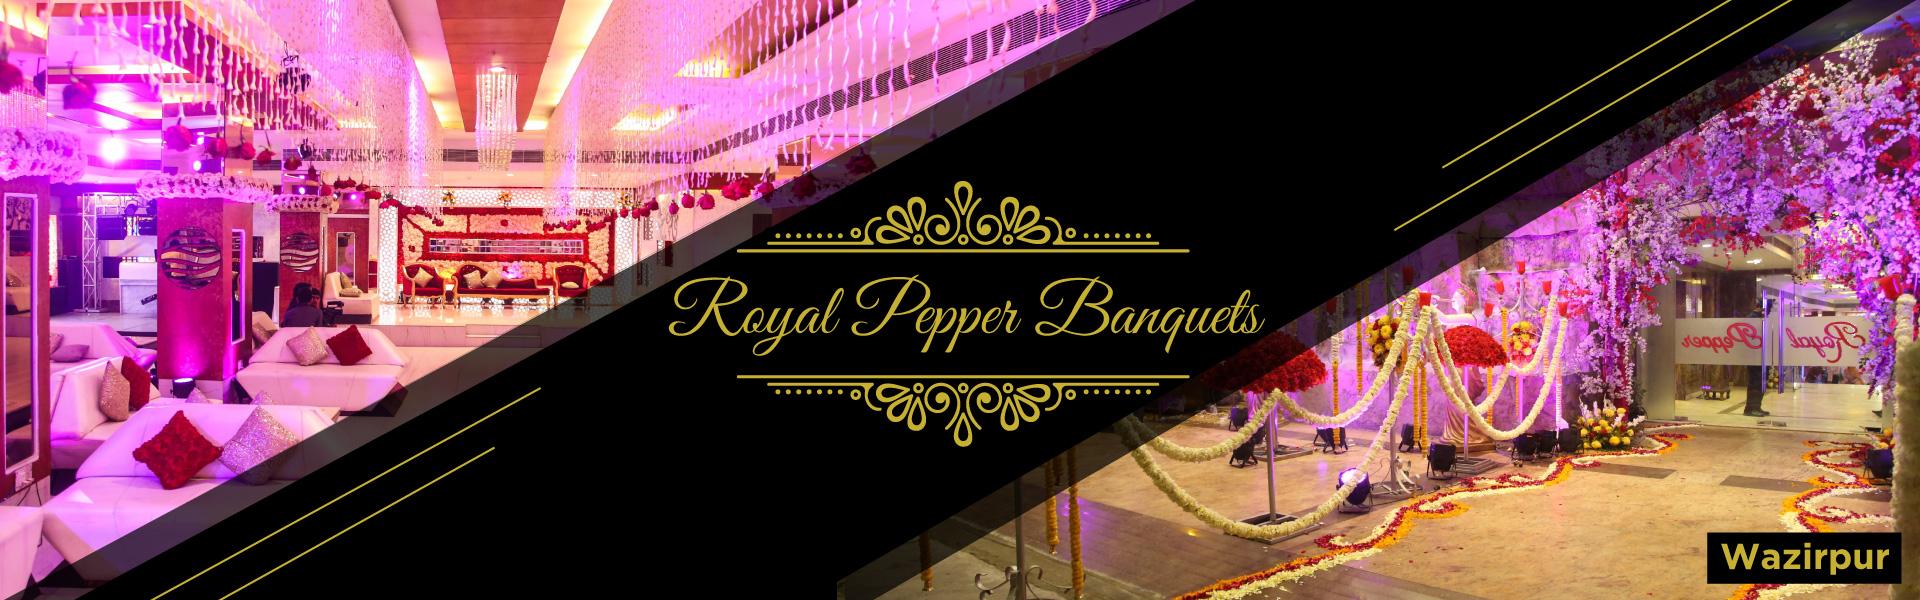 banquets in wazirpur, Banquet Hall in wazirpur, By Royal Pepper Banquets